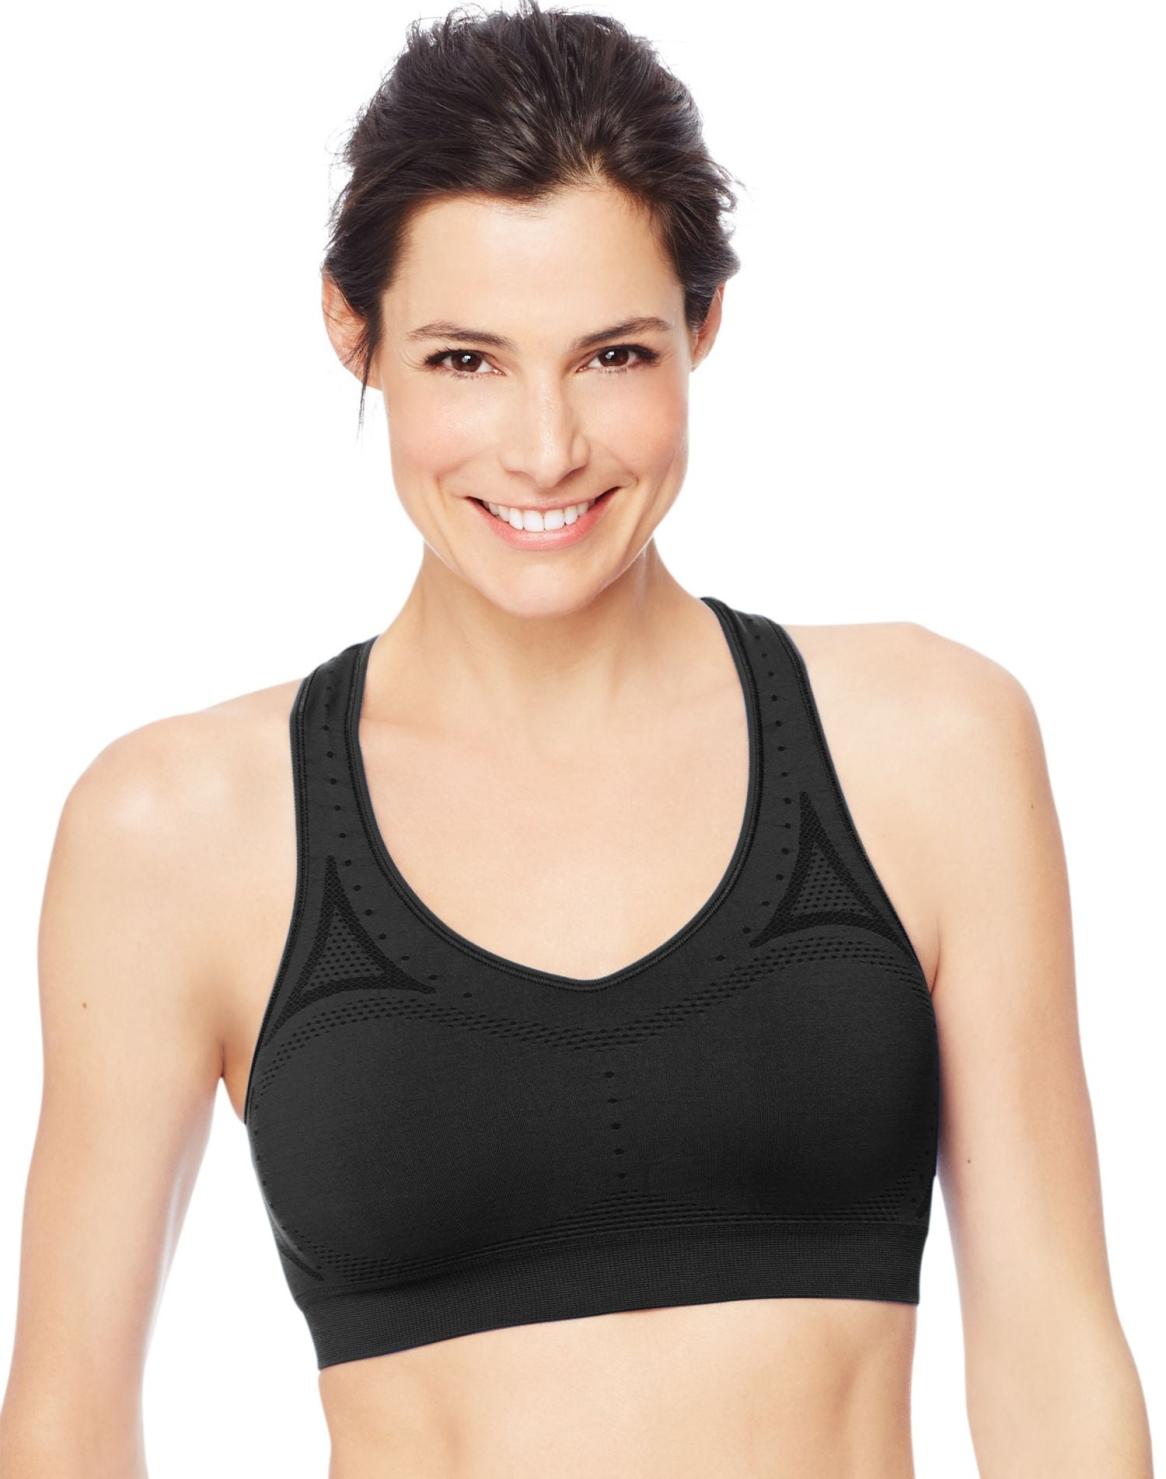 What Are the Latest Trends in Activewear Fashion Sports Bras?